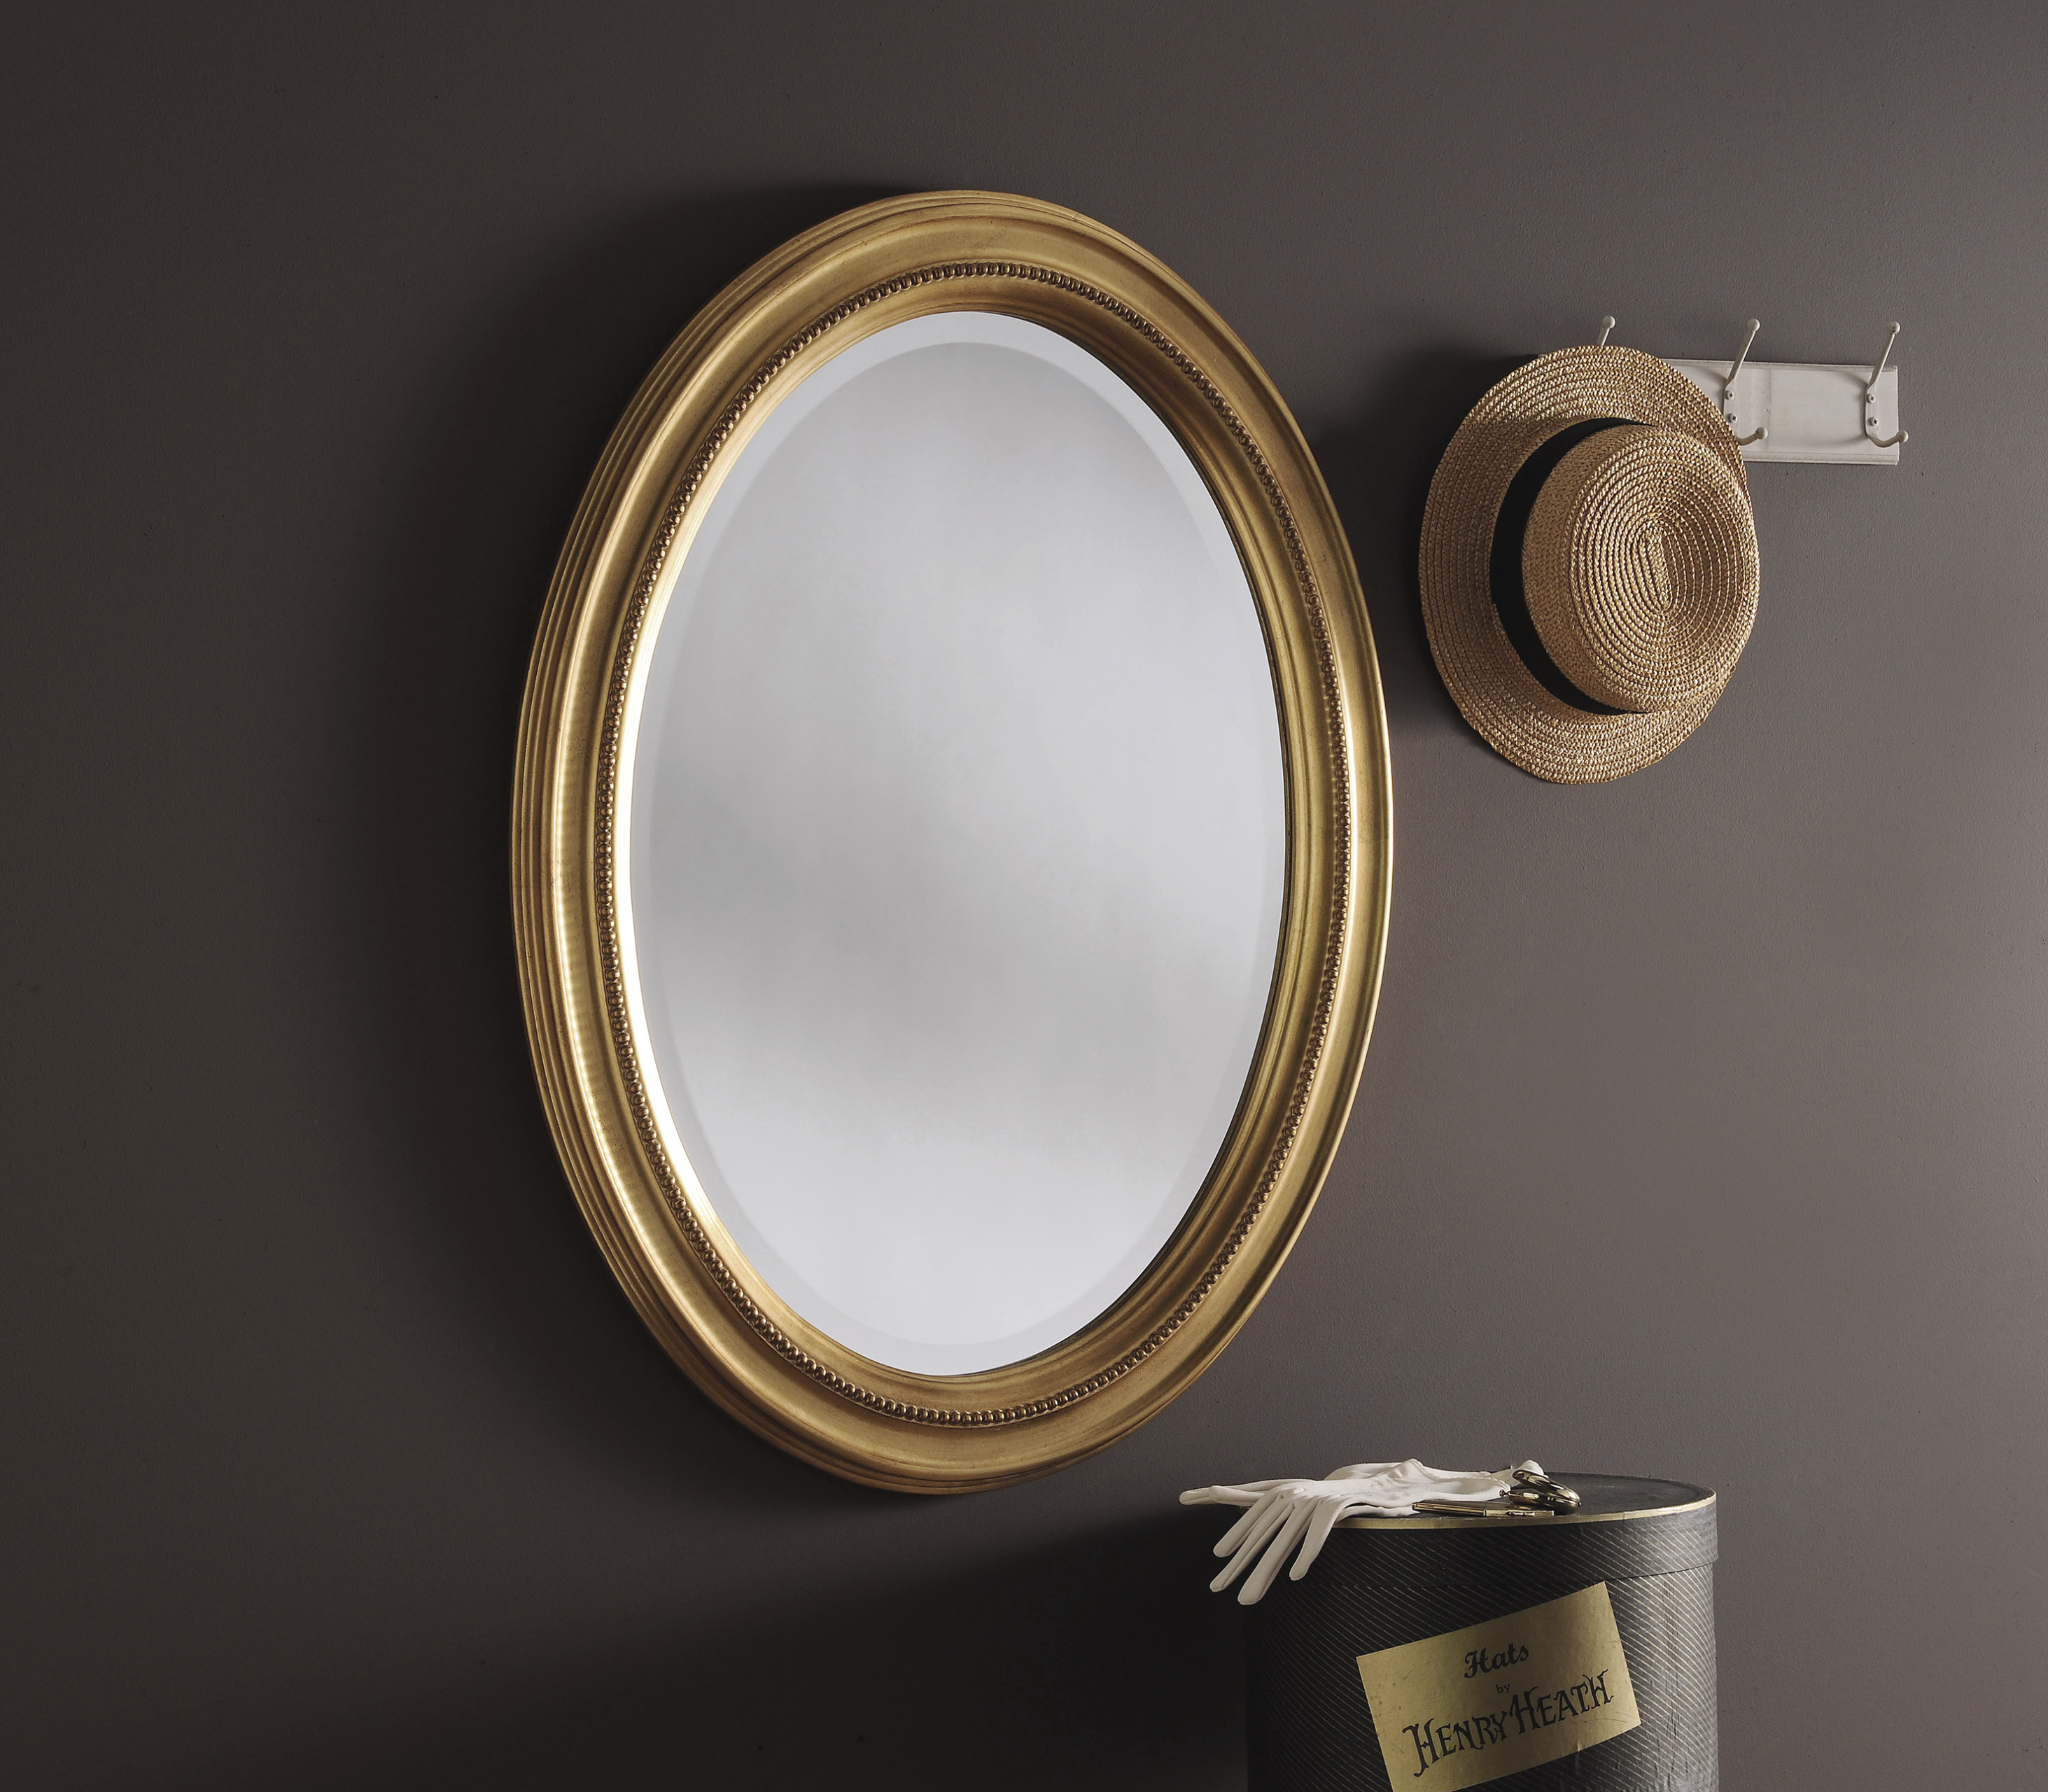 Oval Mirror: Reflection Of Elegance